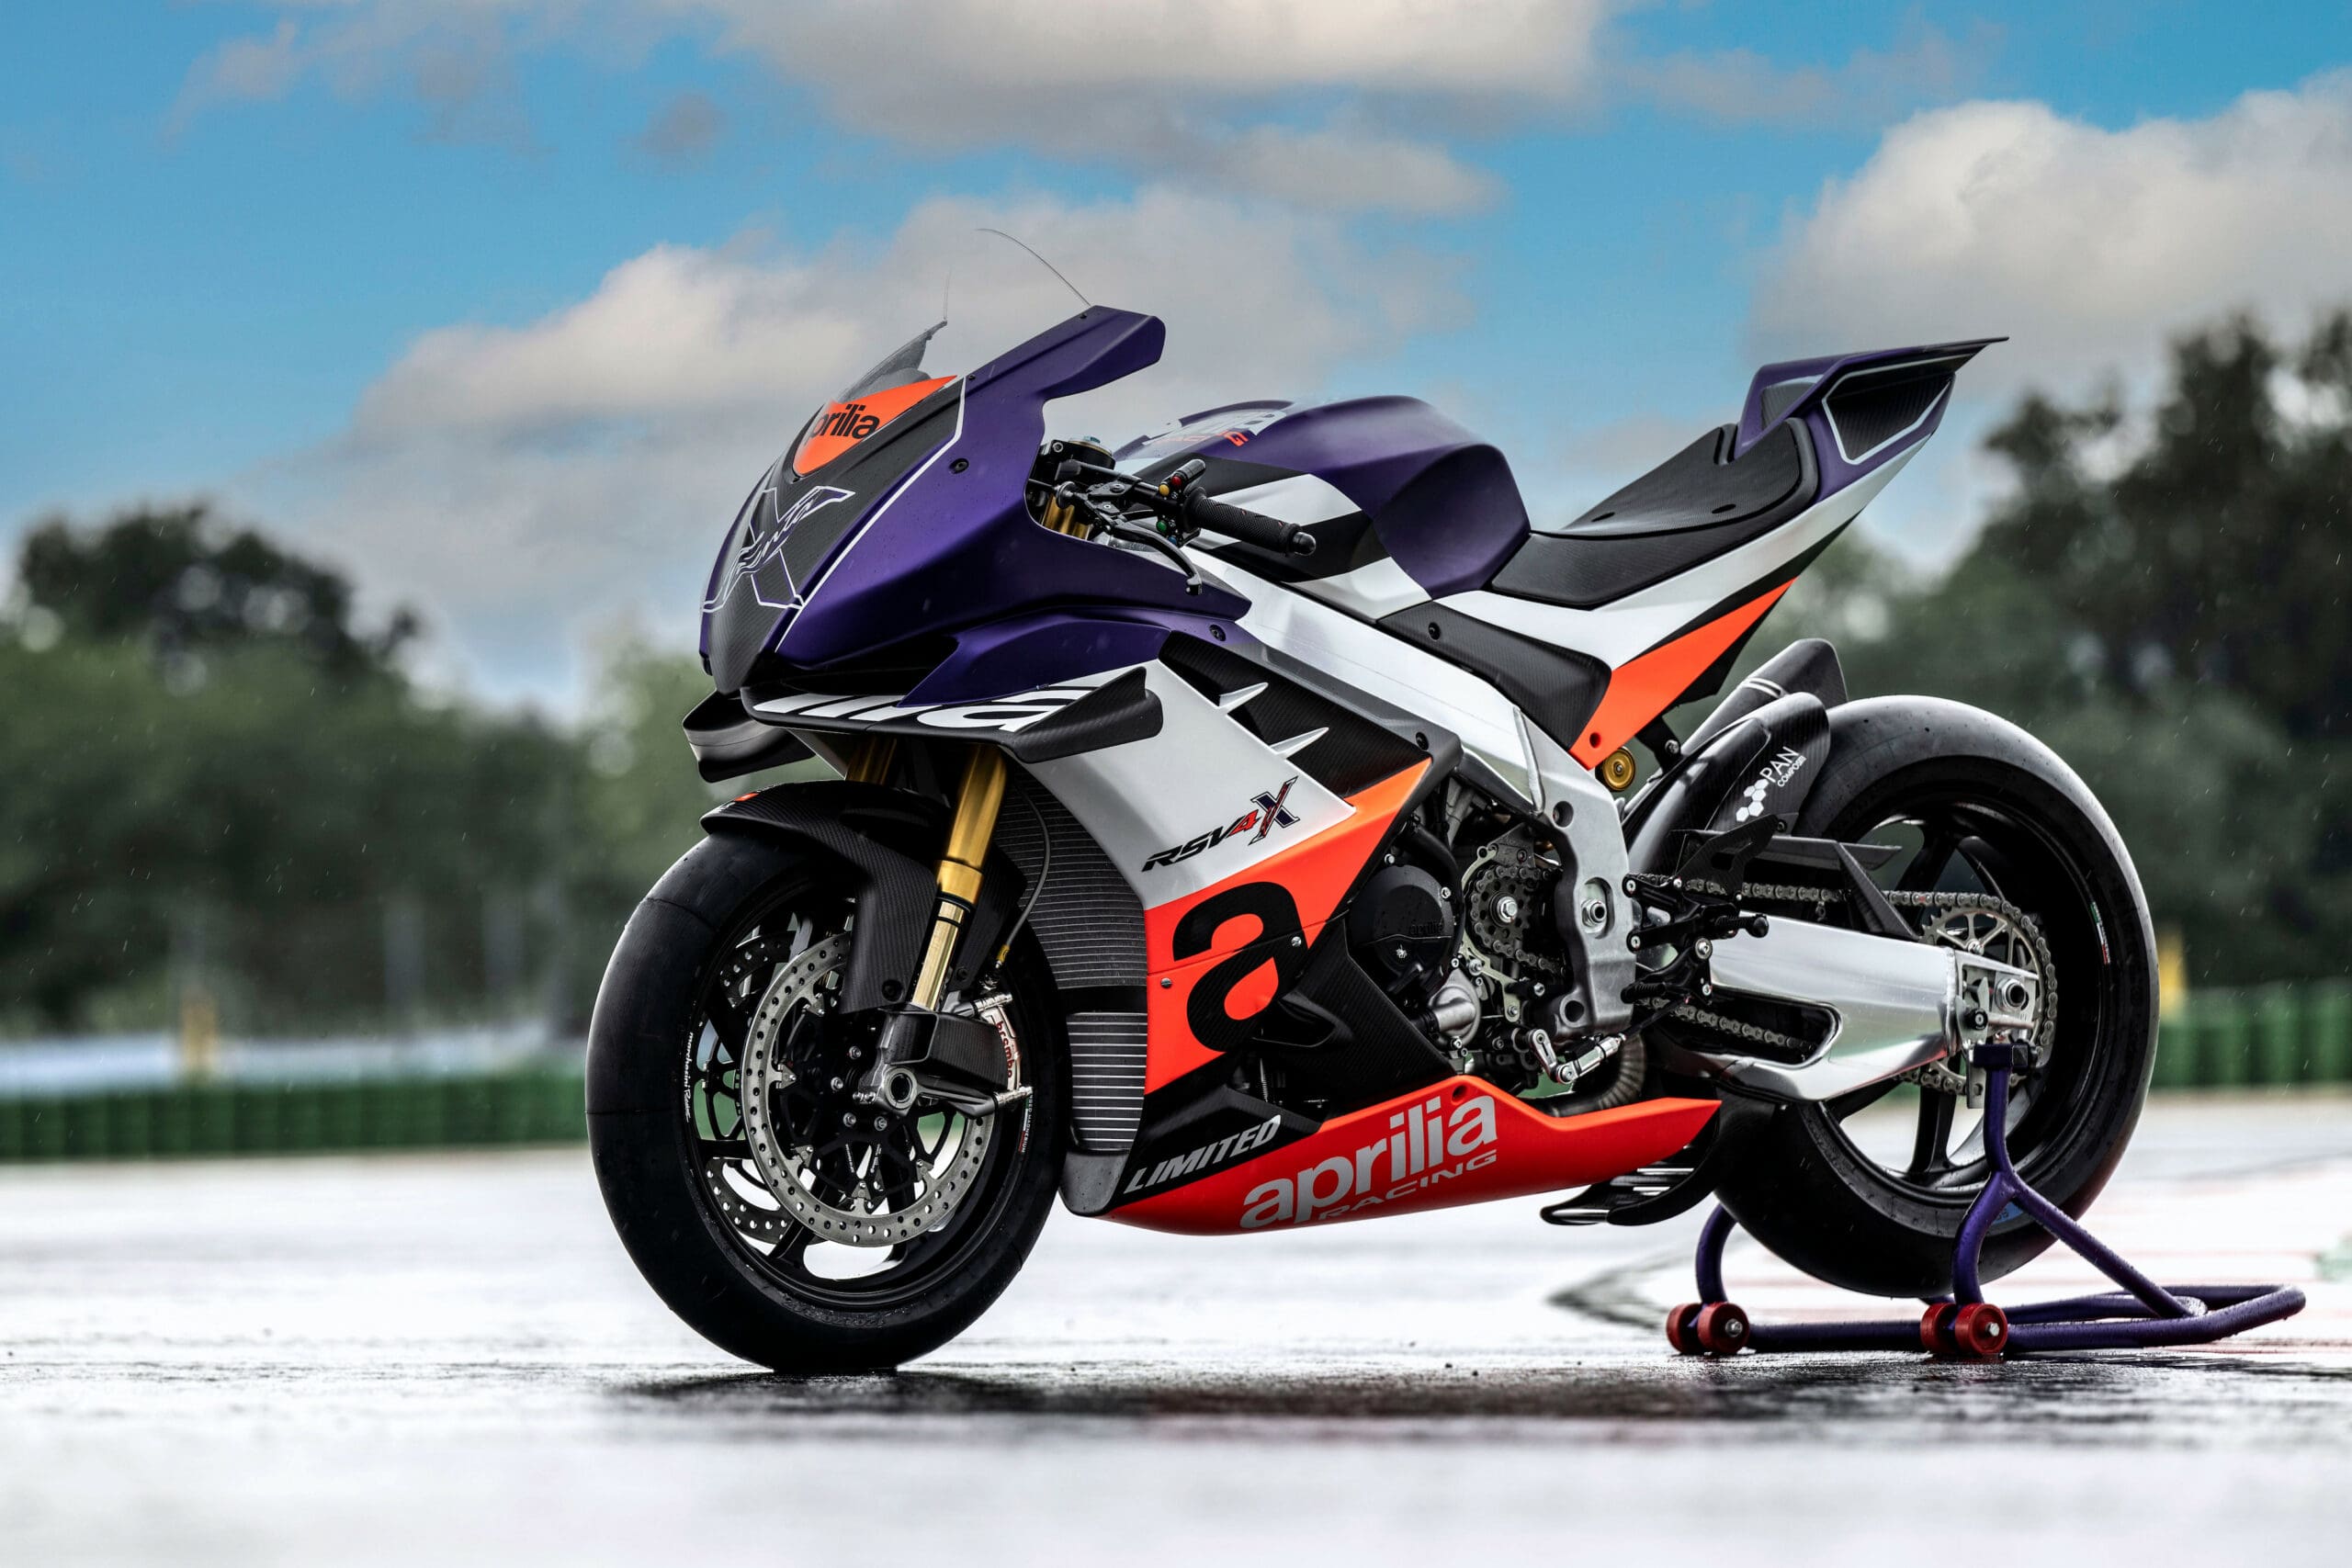 The APrilia RSV4 XTrenta, April's massive track-only, limited edition supersport. Media sourced from the relevant press release.